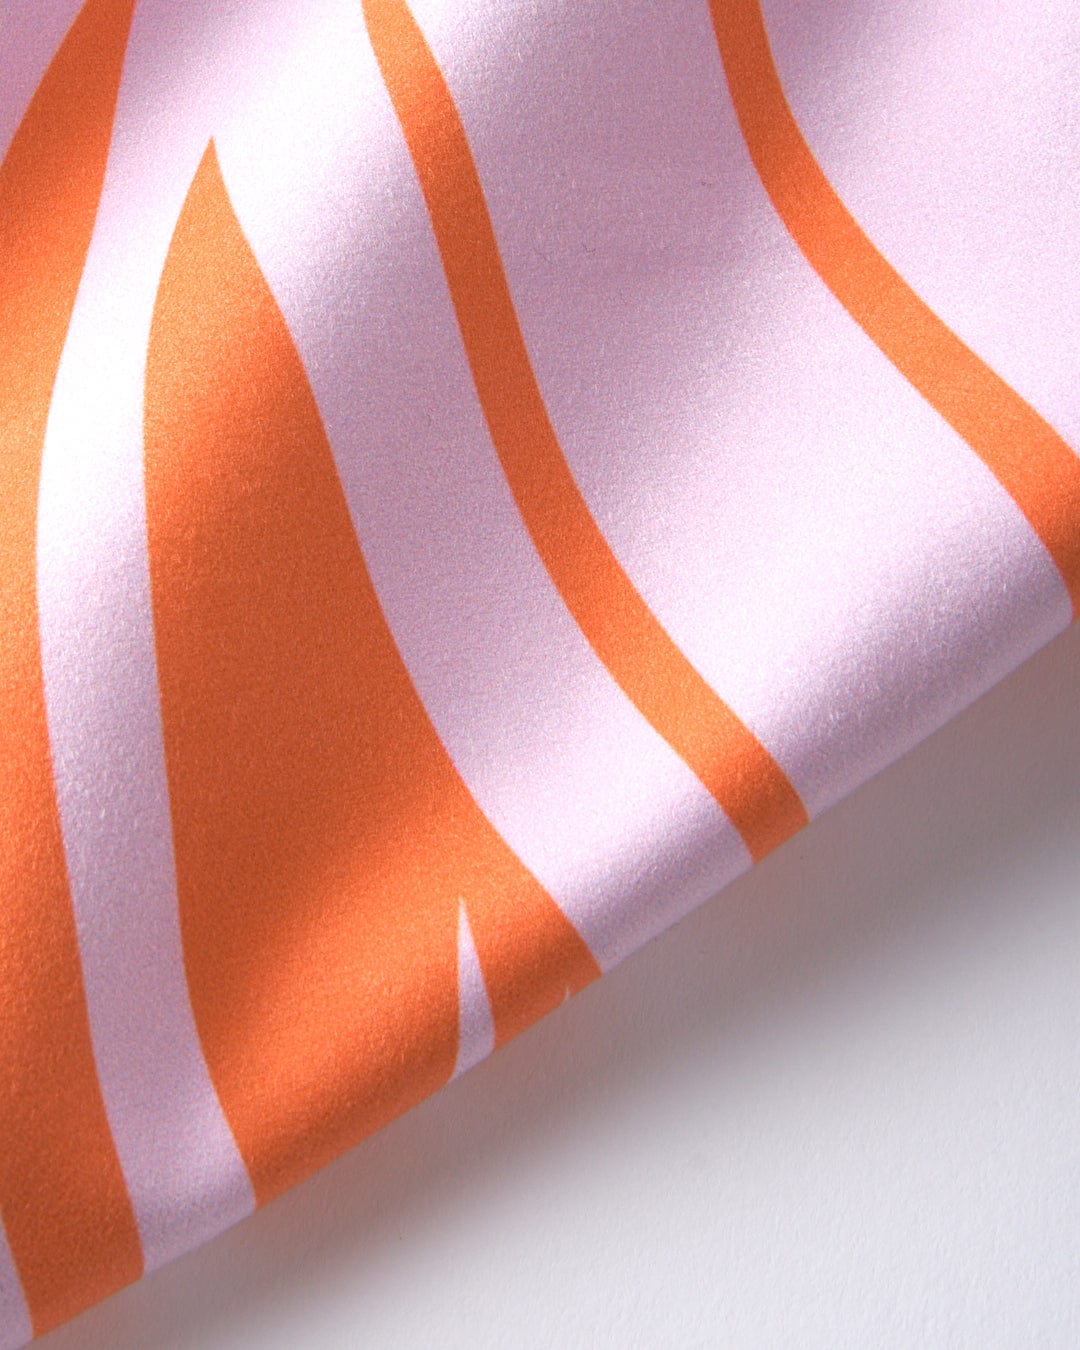 A close up of a Cold Water Club - Microfibre Towel - Orange and white striped absorbent fabric by Saltrock.